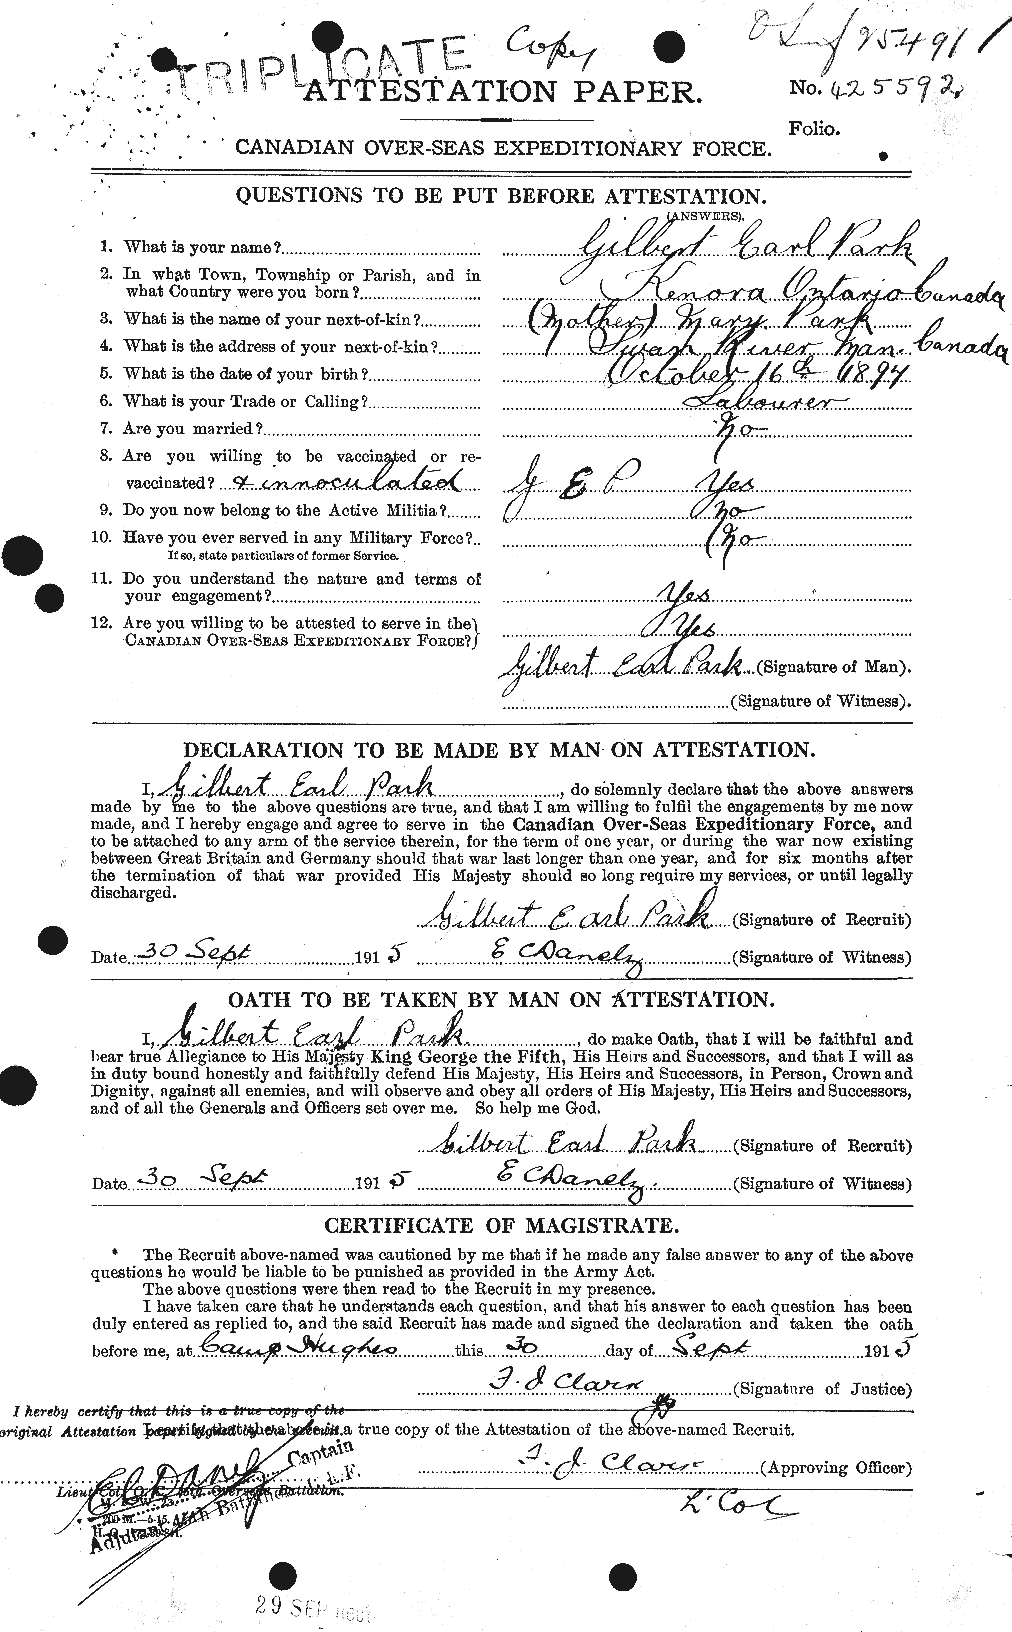 Personnel Records of the First World War - CEF 564785a